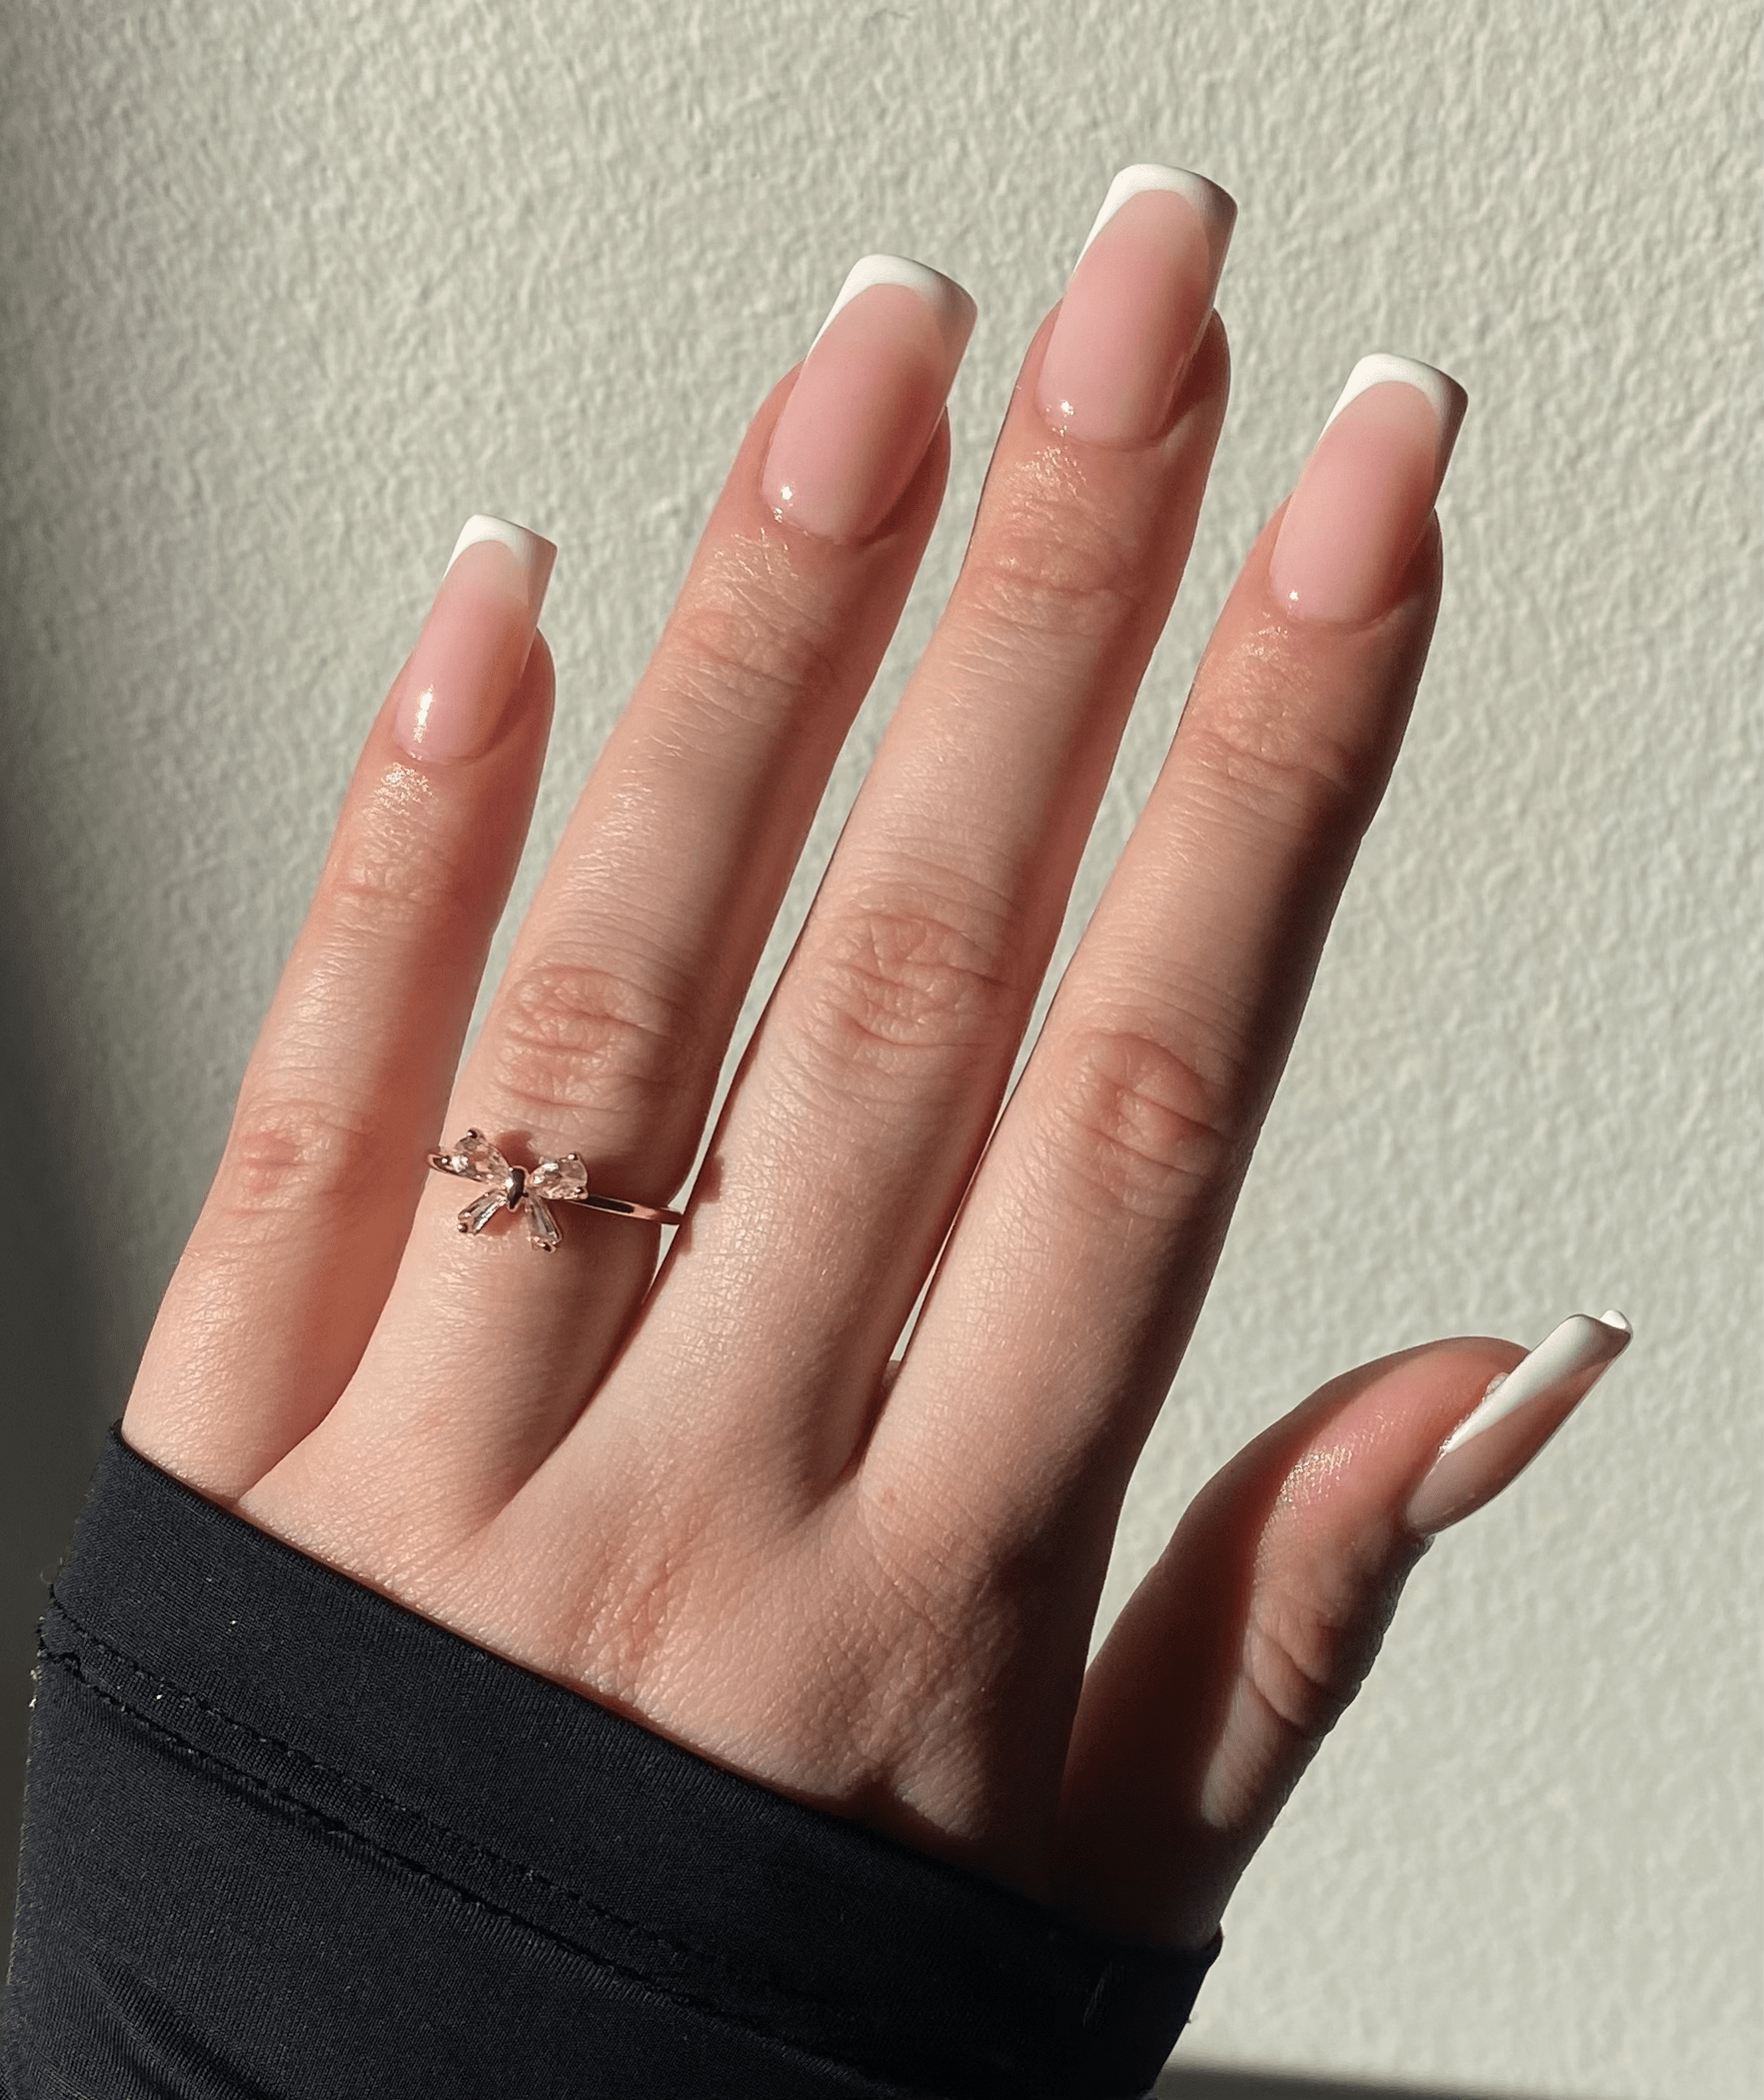 Winter Nail Art Trends: Easy and Trendy Designs for Cool Nails